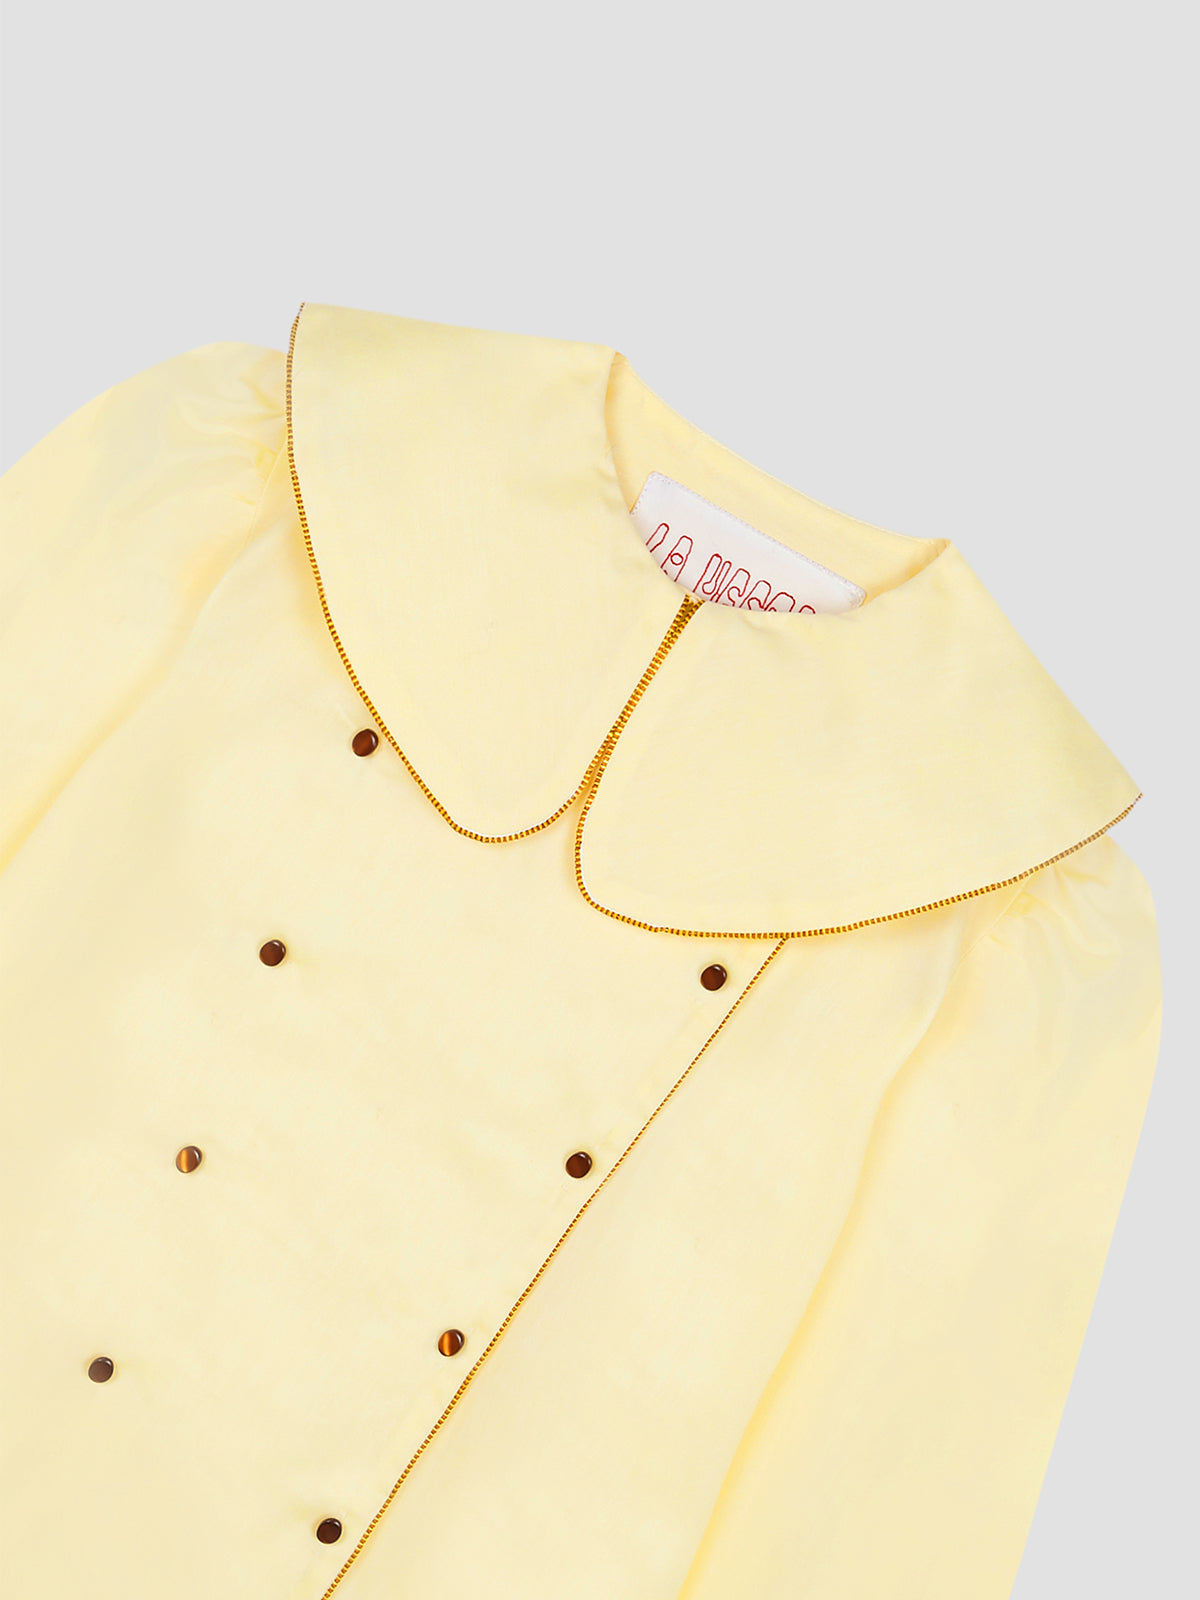 Women's yellow long sleeve shirt with brown piping details on collar and sleeves